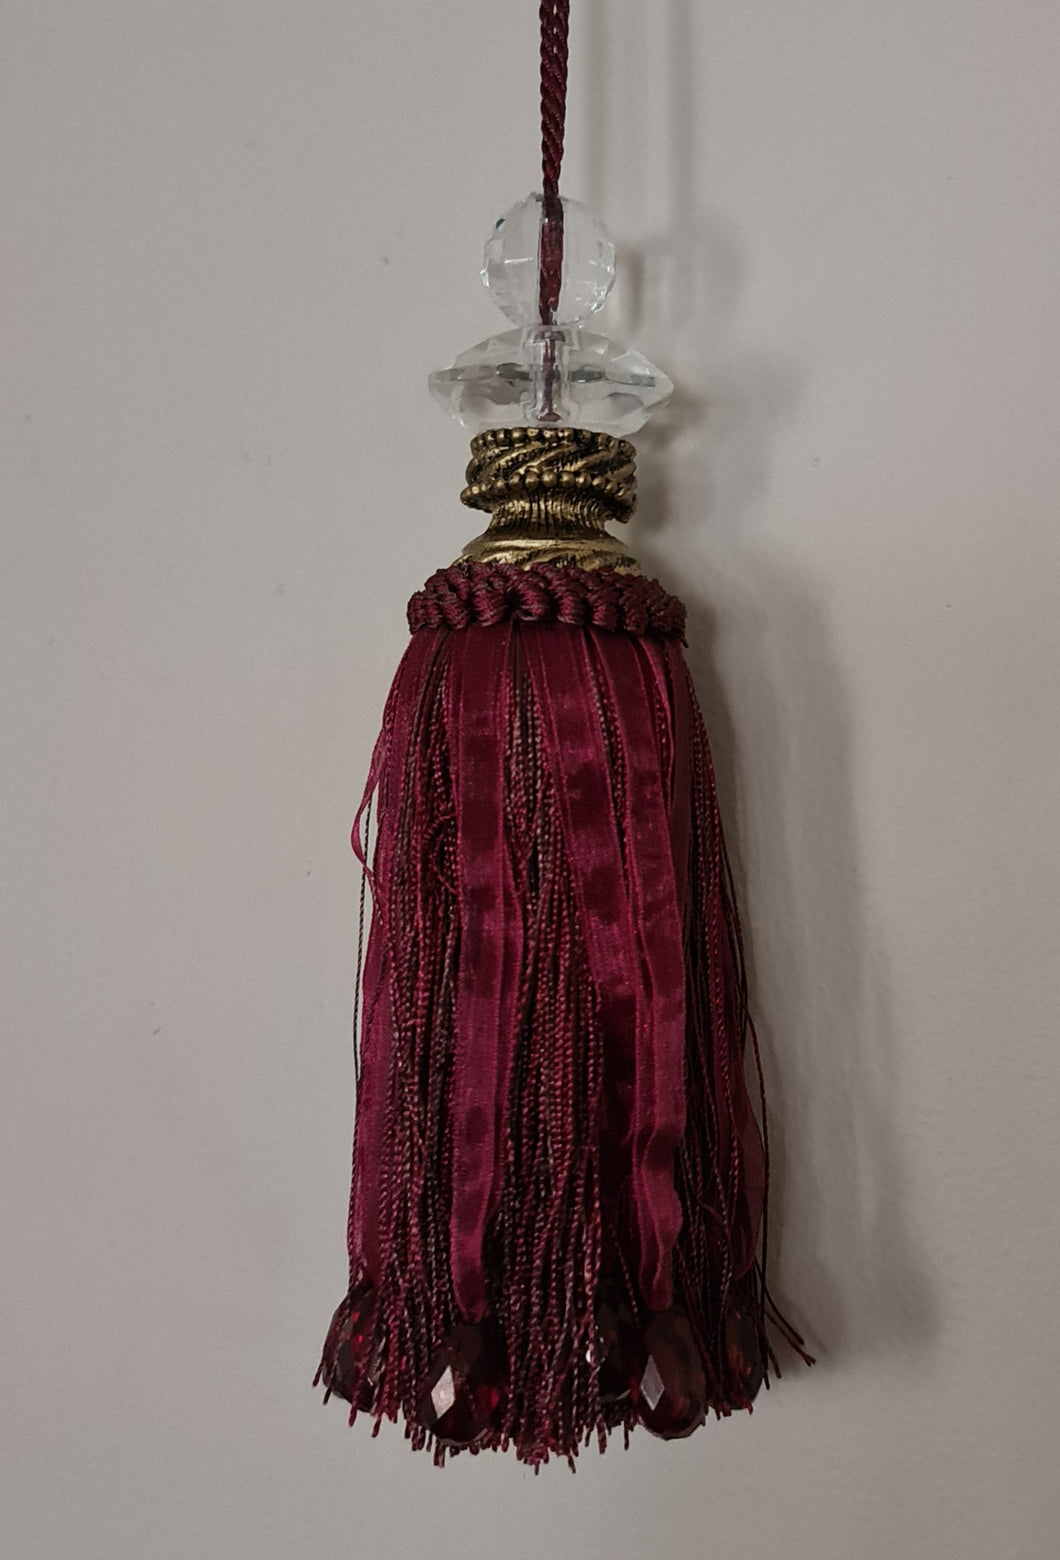 Large Tassel with Double Faceted Glass Top - Red Wine - Decorative Tassel for Antique Key or Door BRWT01